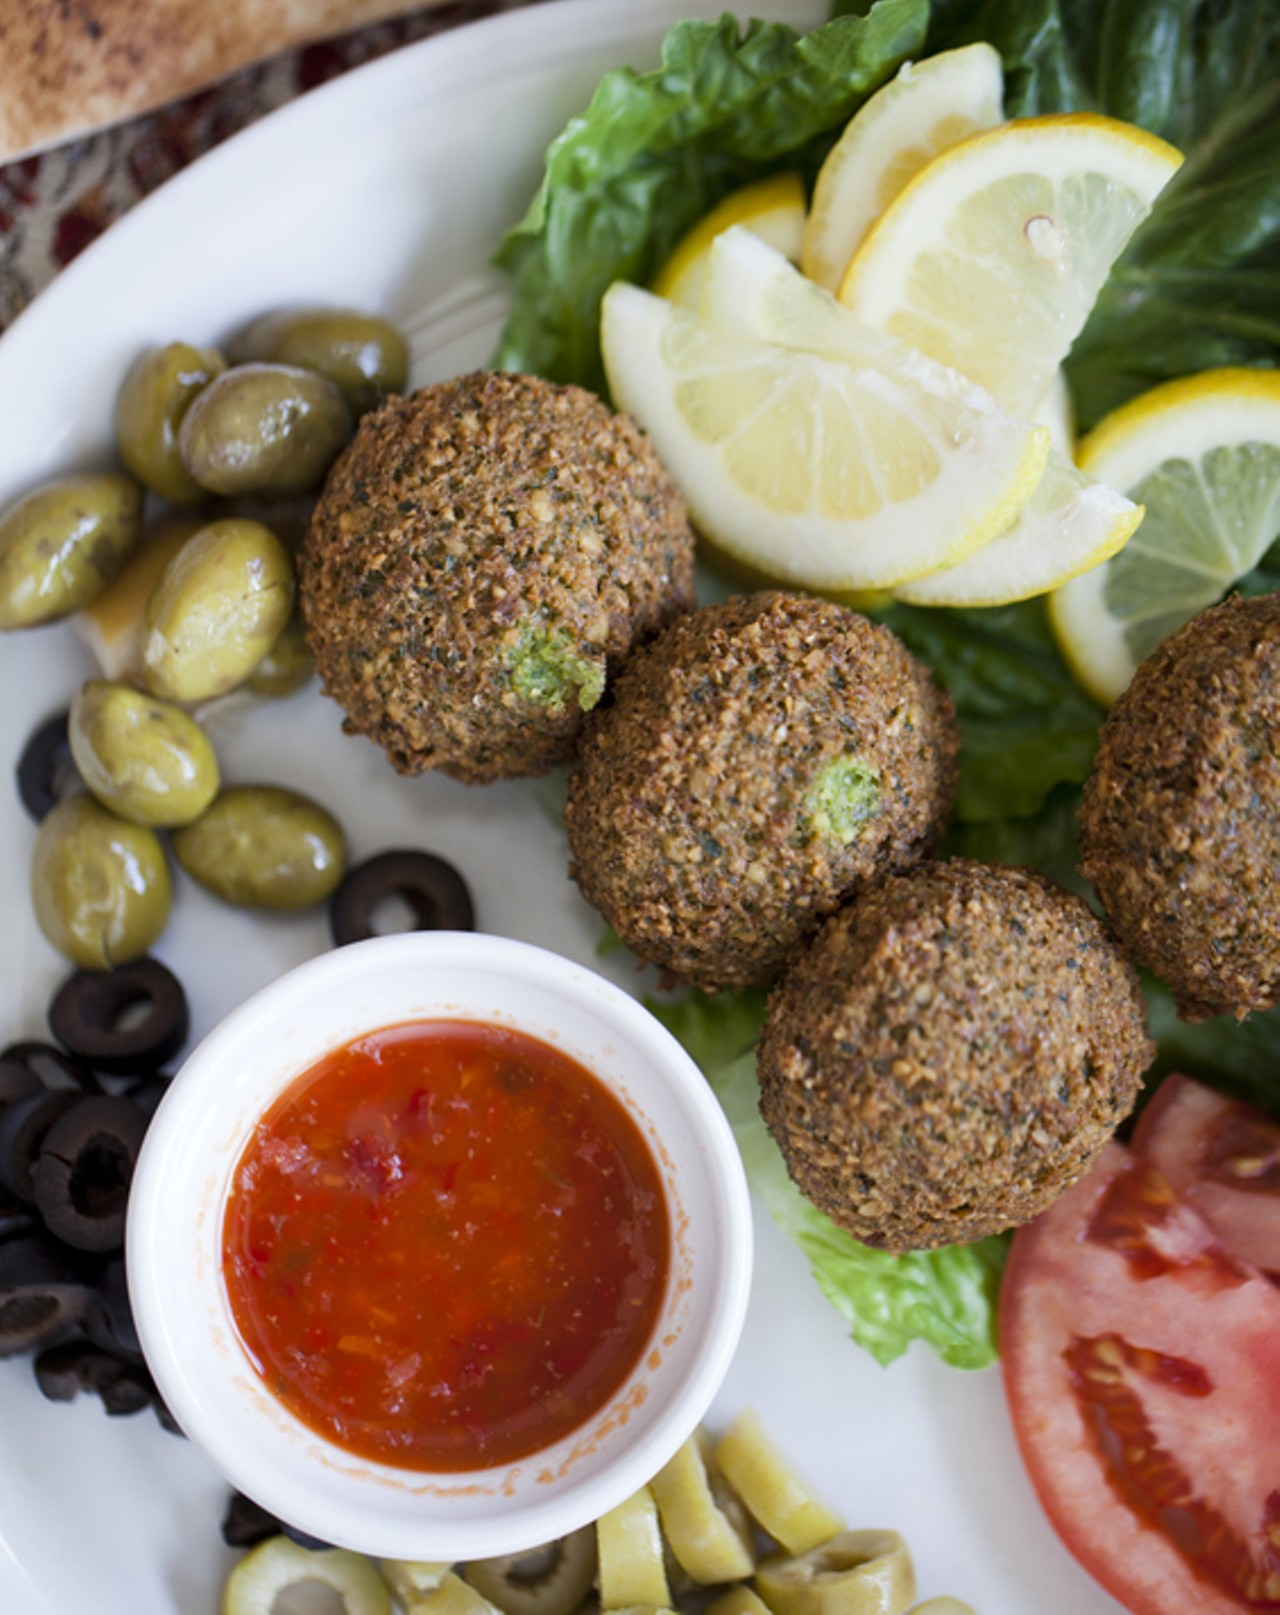 Falafel - lightly fried balls of spiced chickpeas with garlic and parsley.